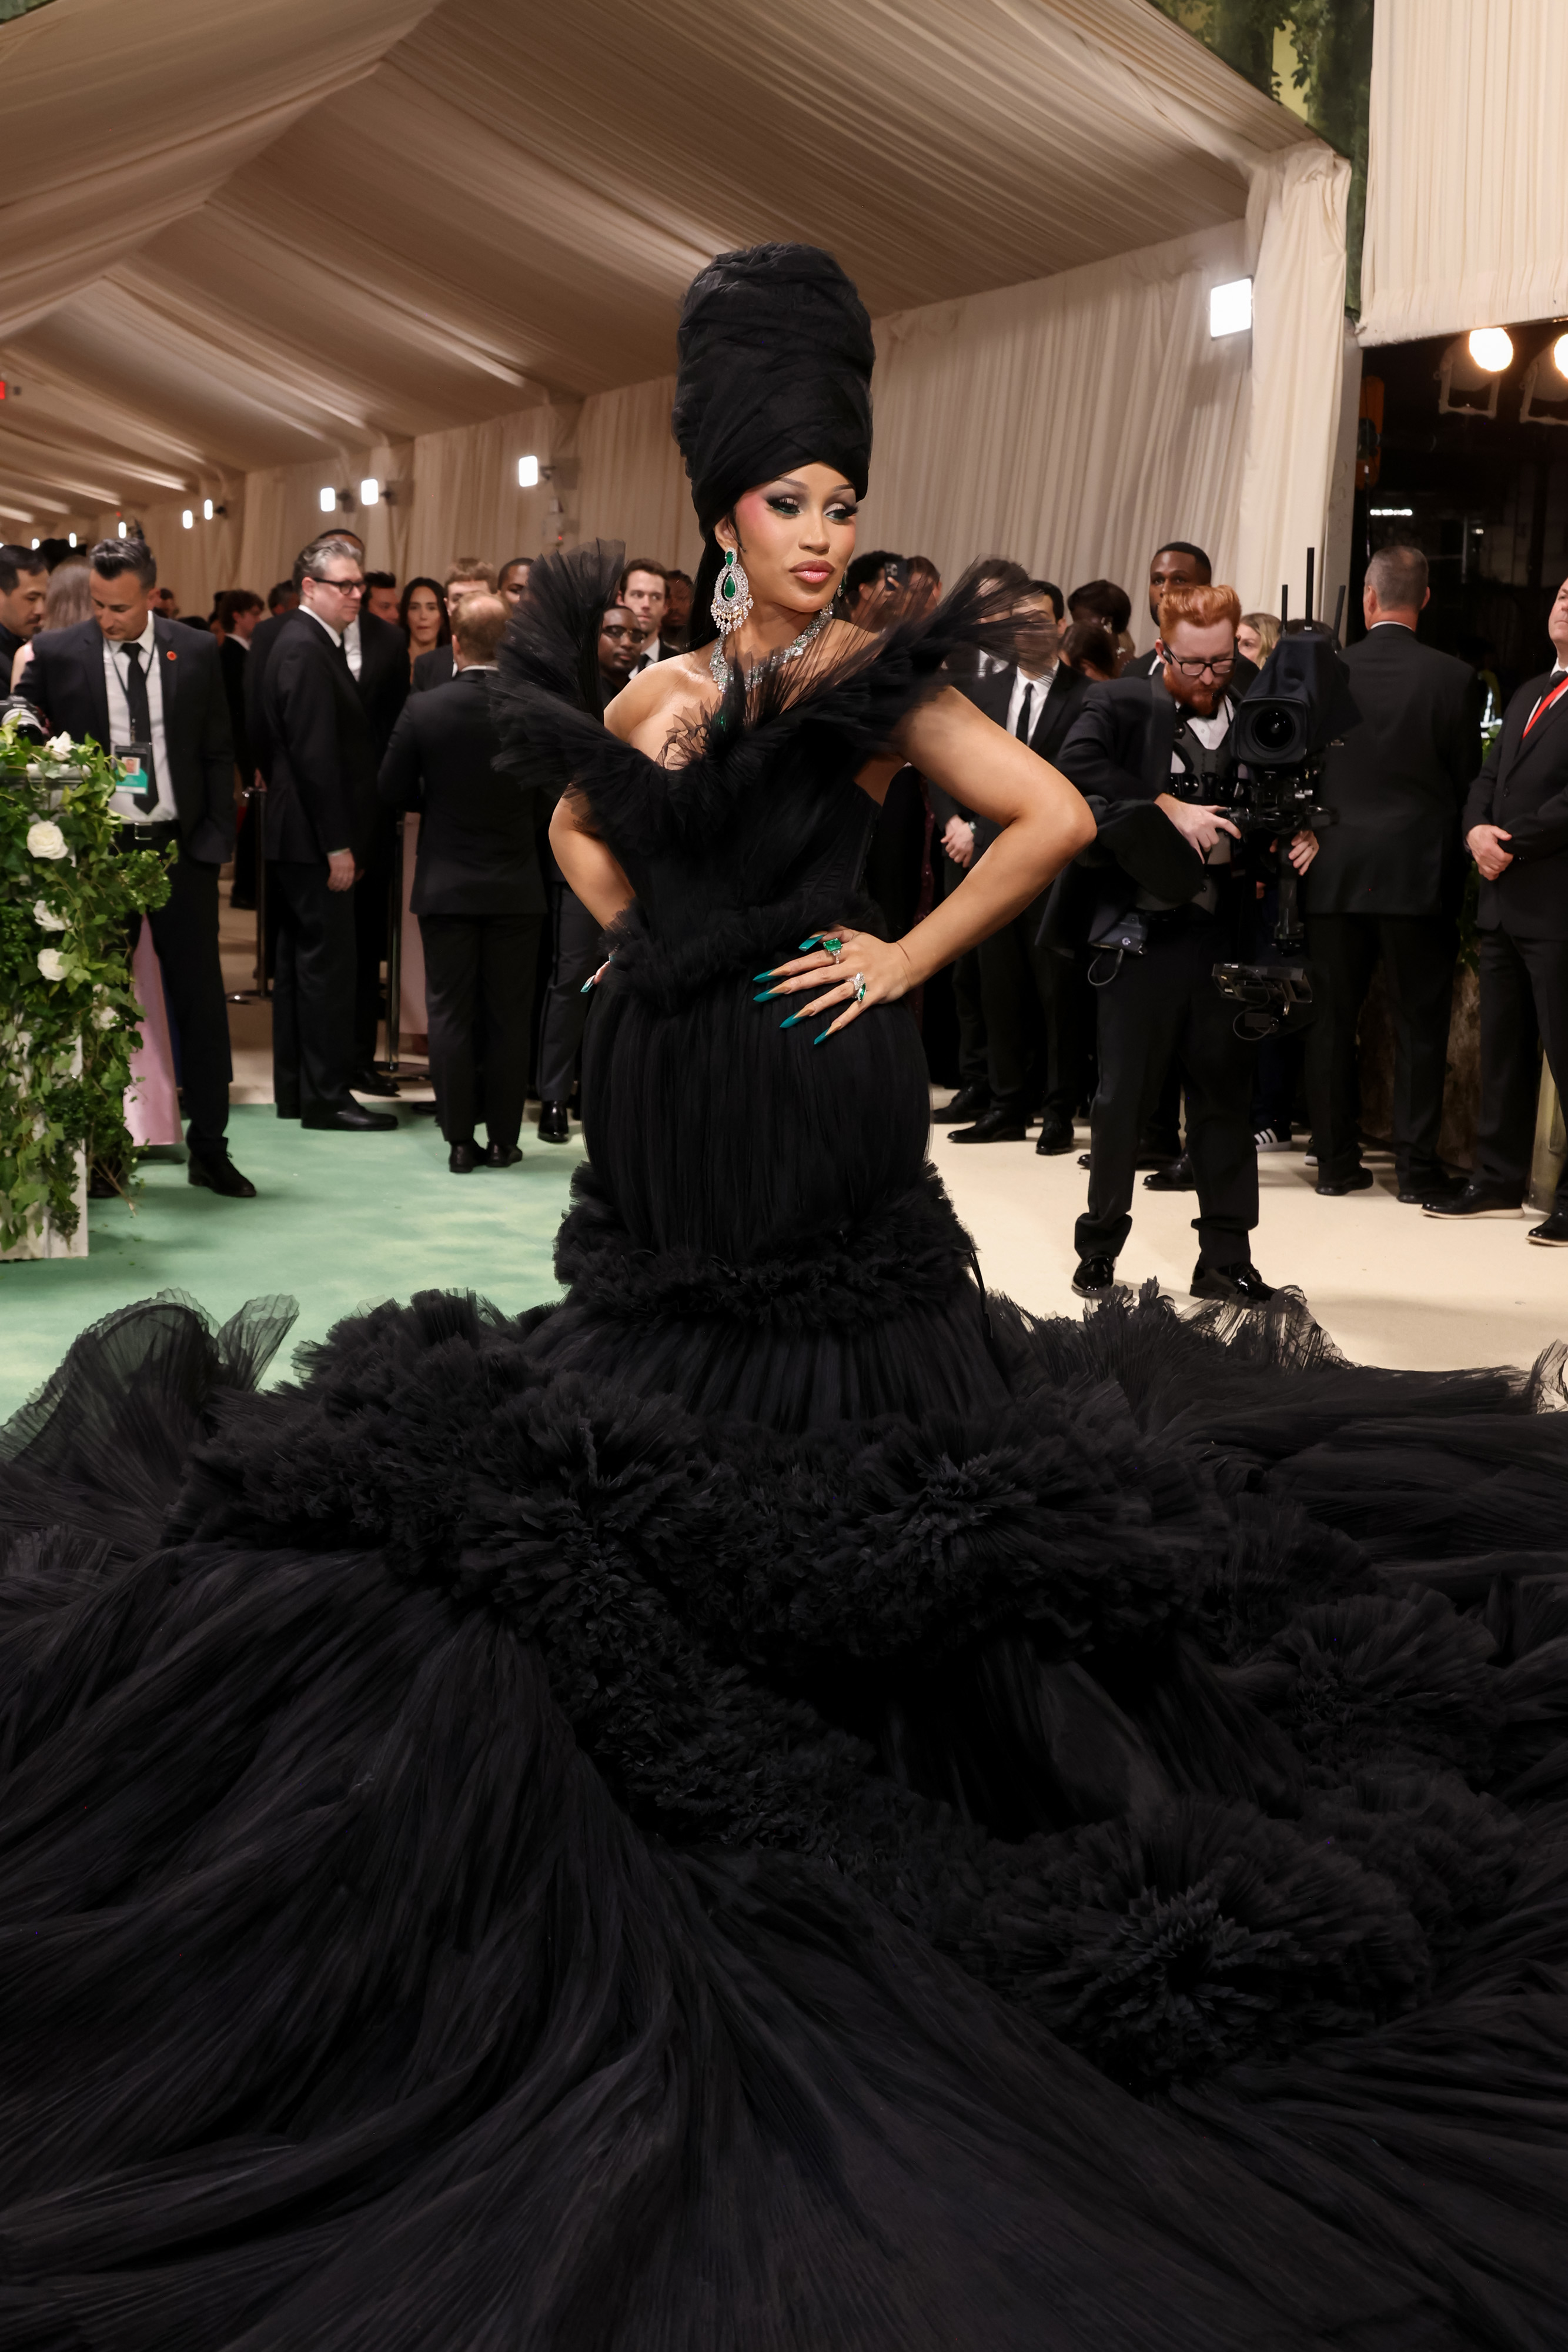 Cardi B in an extravagant black feathered gown and towering headpiece on the red carpet